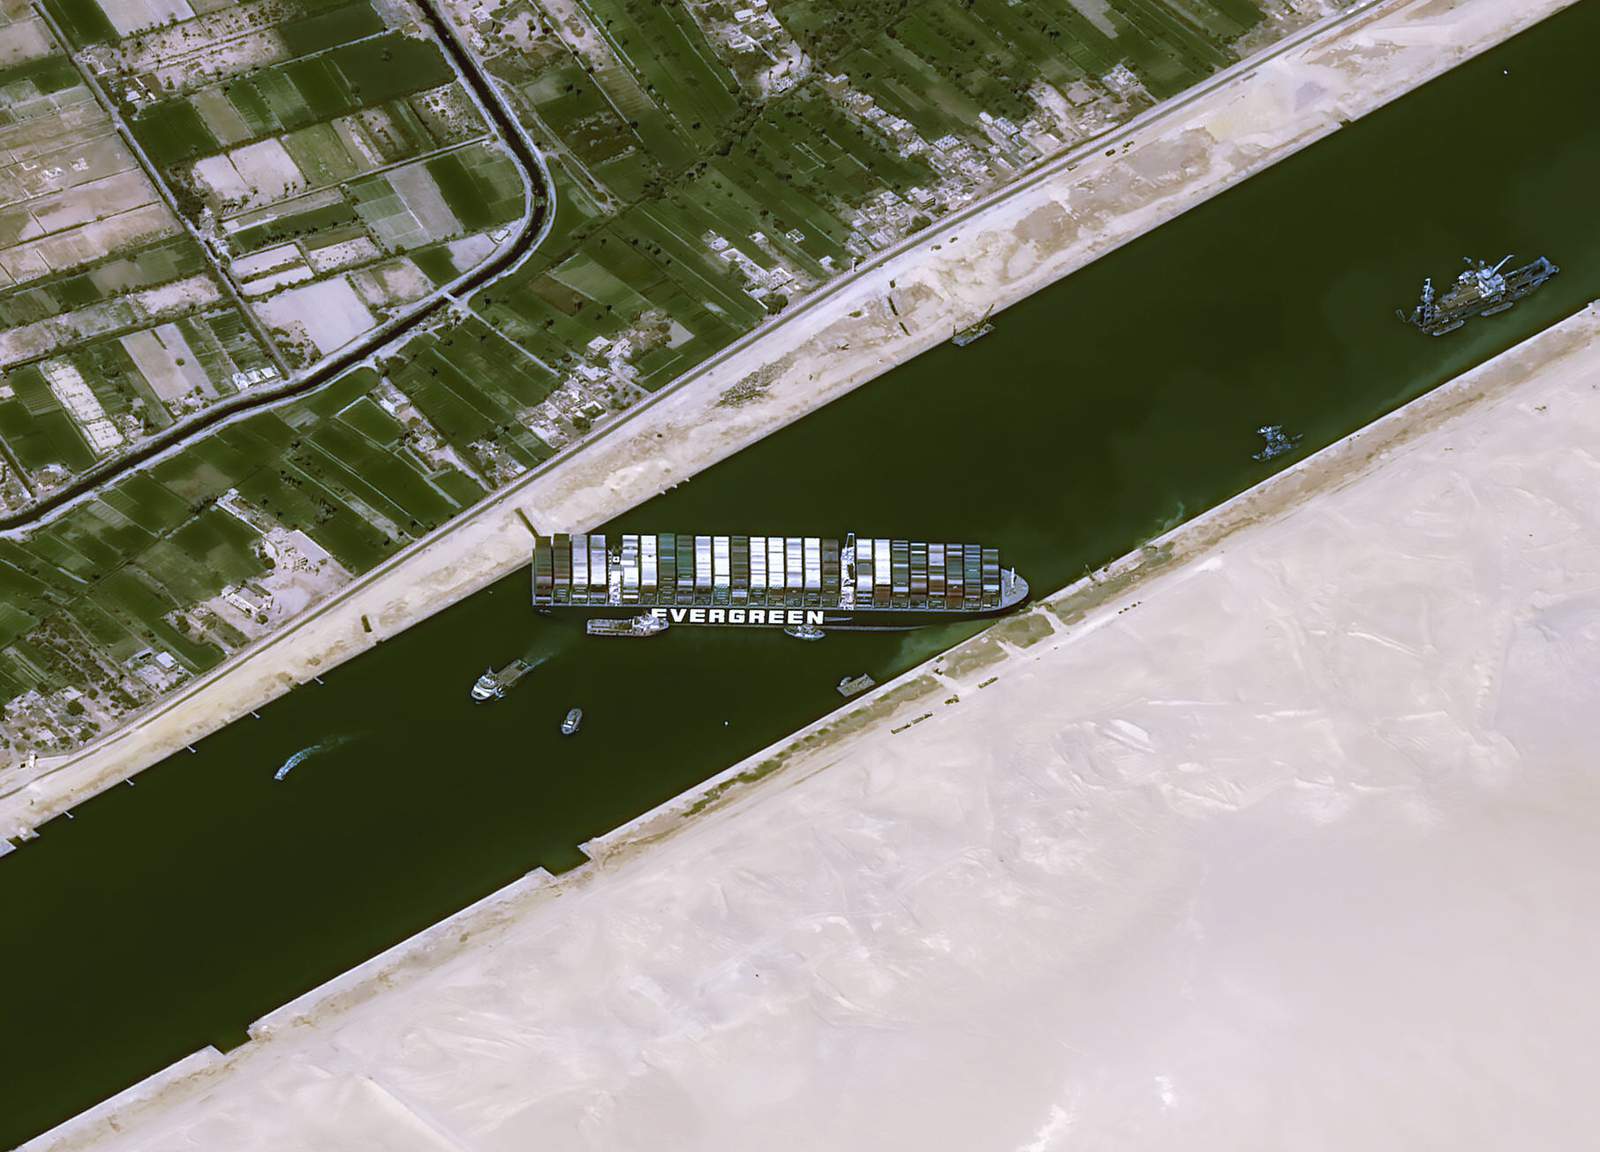 Shipping losses mount from cargo vessel stuck in Suez Canal